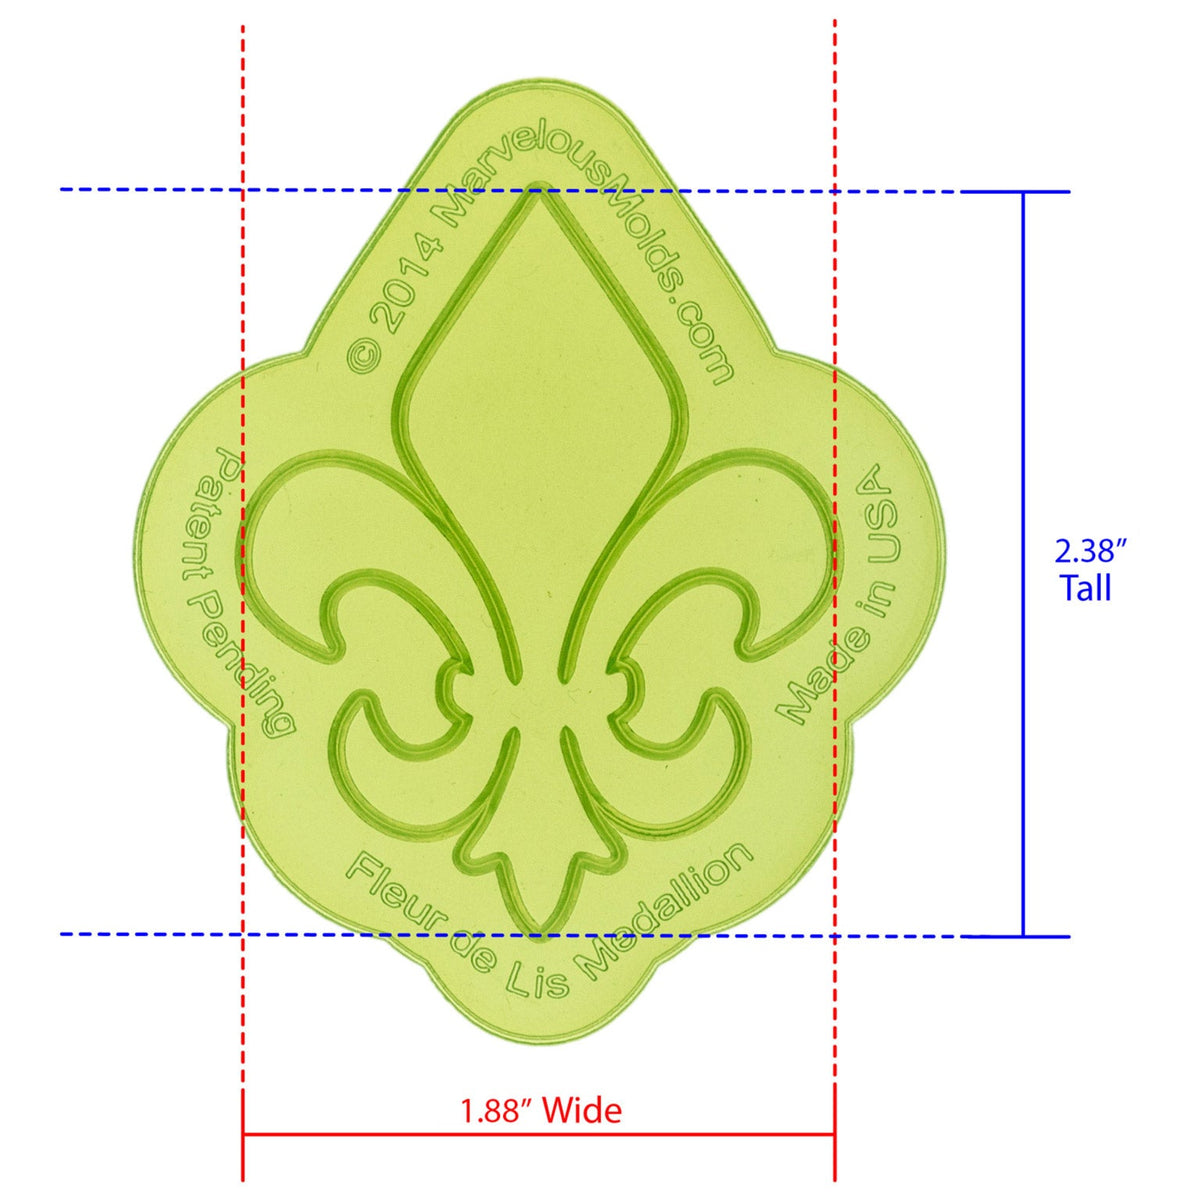 Fleur de Lis Medallion Silicone Onlay measures 1.88 inches Wide by 2.38 inches Tall, proudly Made in USA